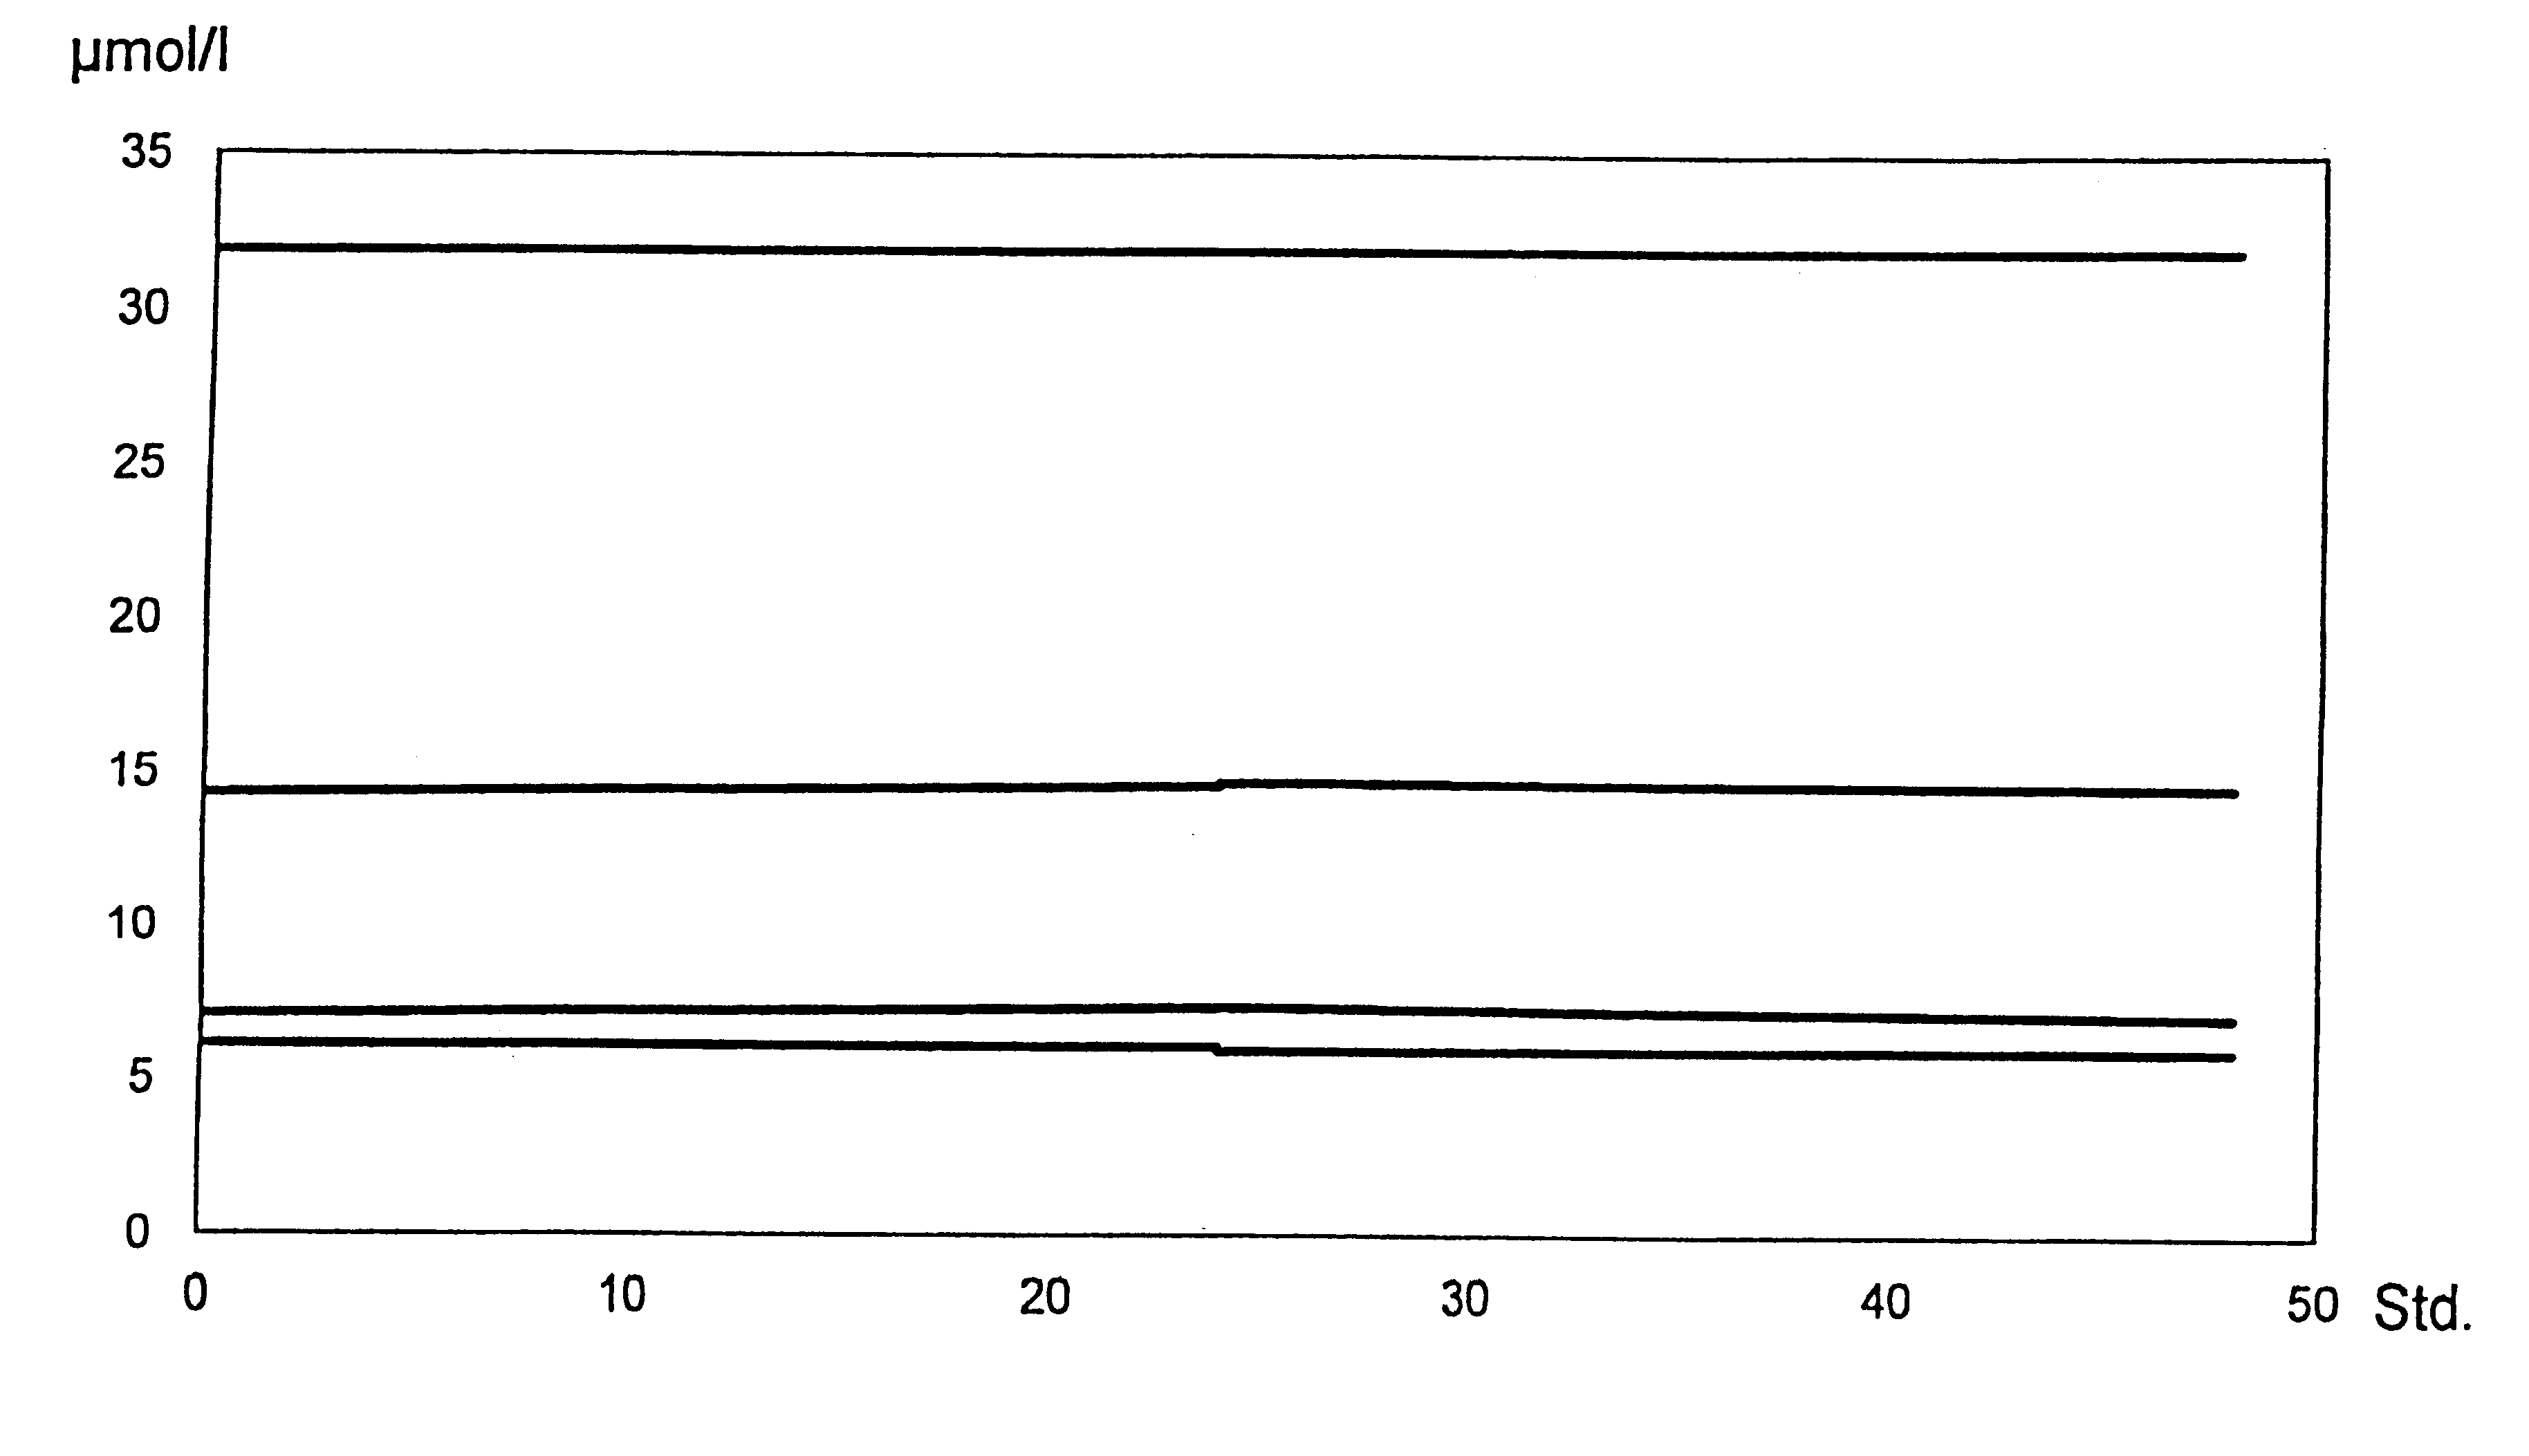 Preparation of blood samples for detecting homocysteine and/or folate